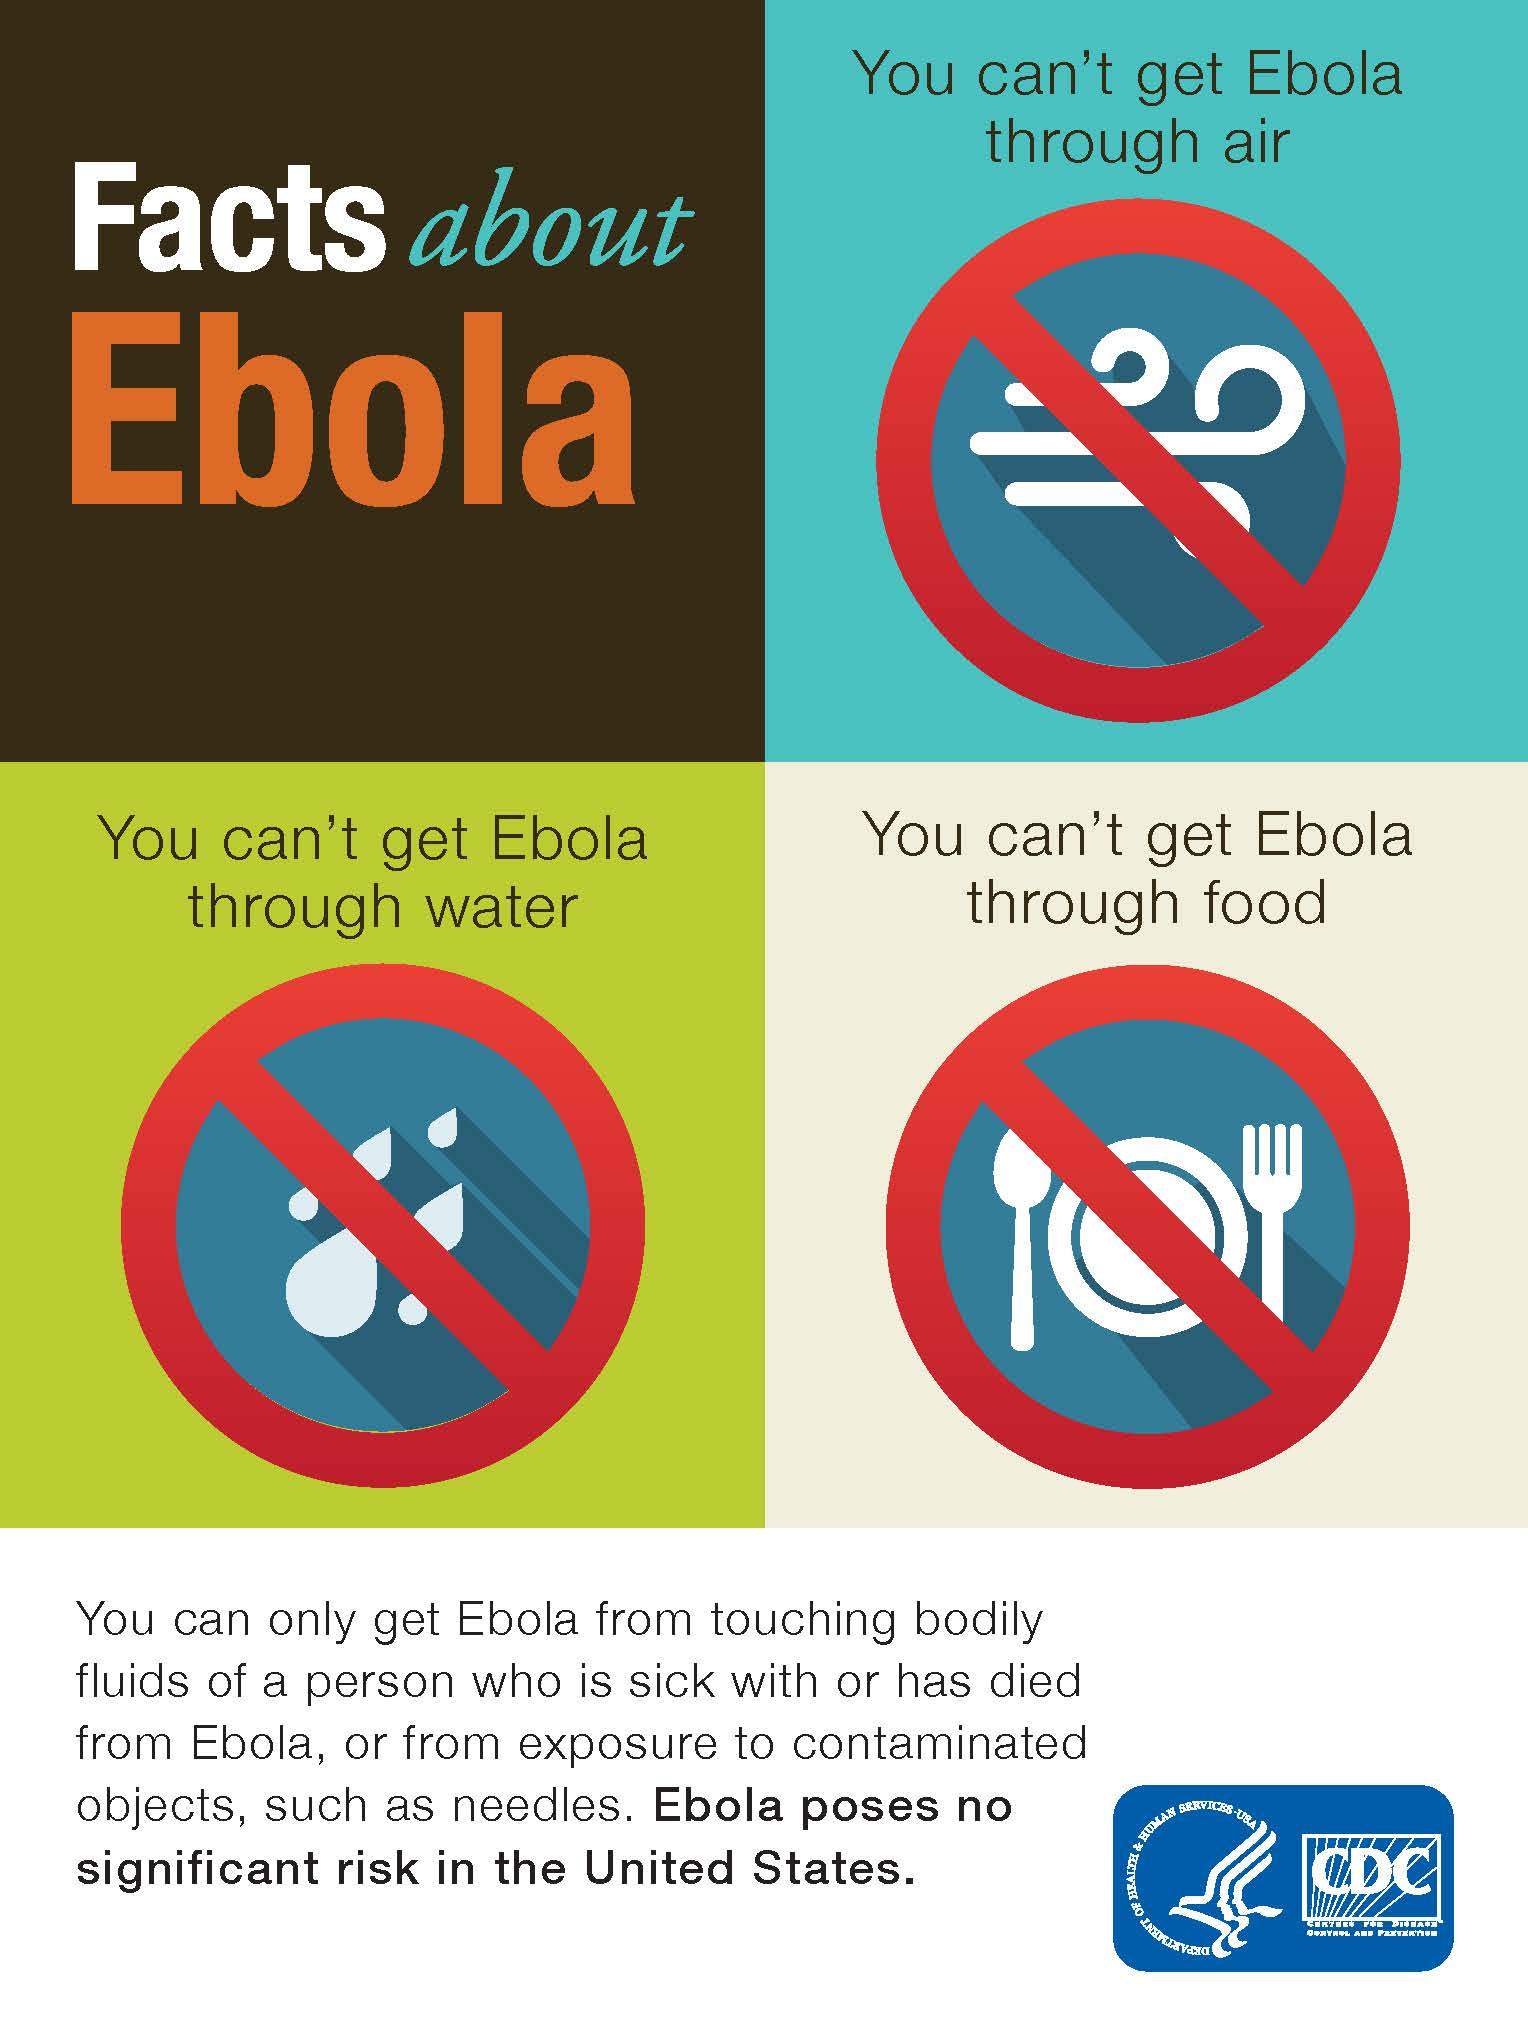 Infographic explaining the ways Ebola can be transmitted